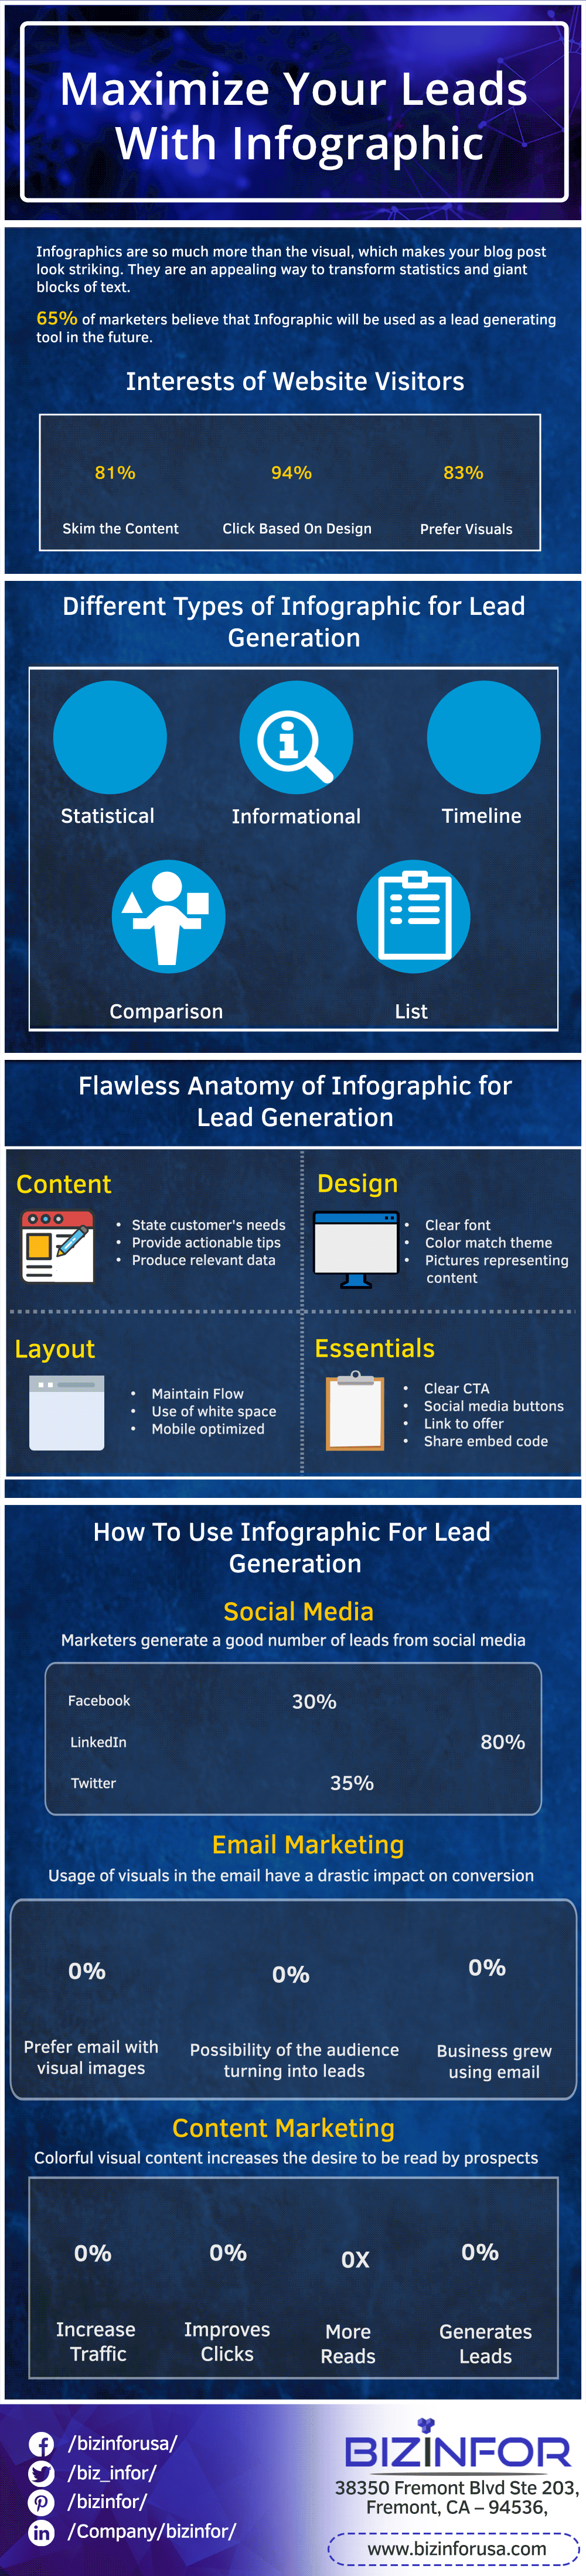 How to Use Infographics for Lead Generation